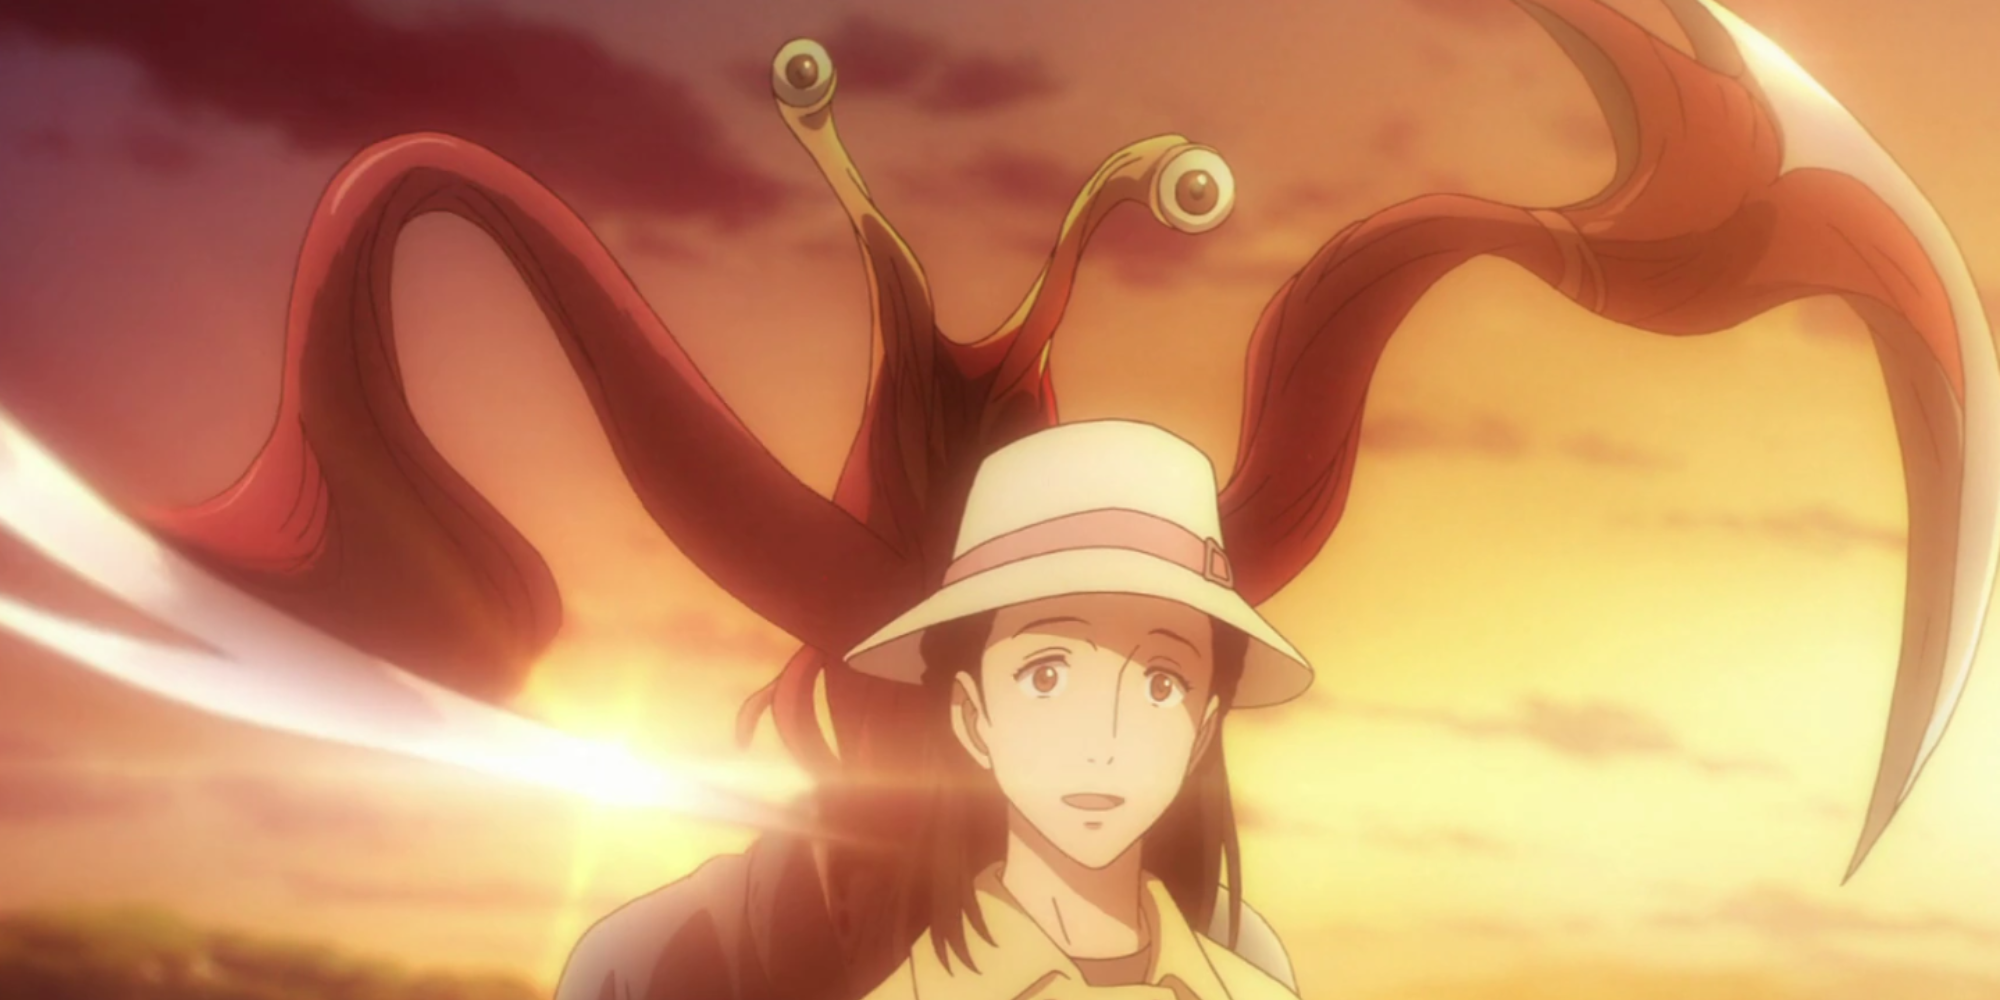 A Parasite Appears Behind Nobuko In Parasyte The Maxim